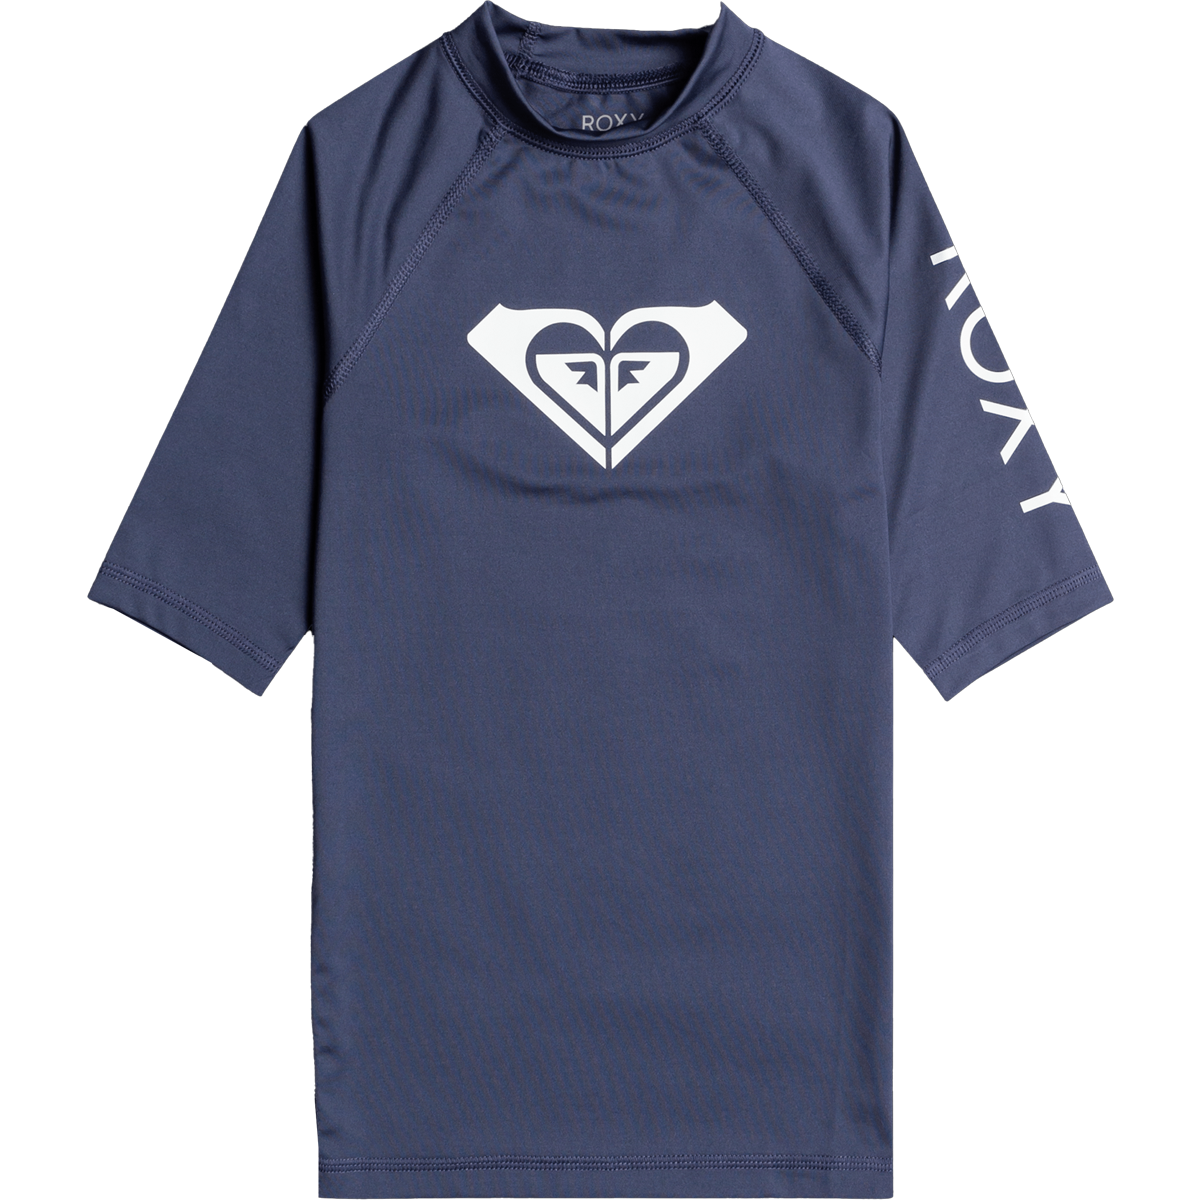 Youth Whole Hearted Short Sleeve alternate view